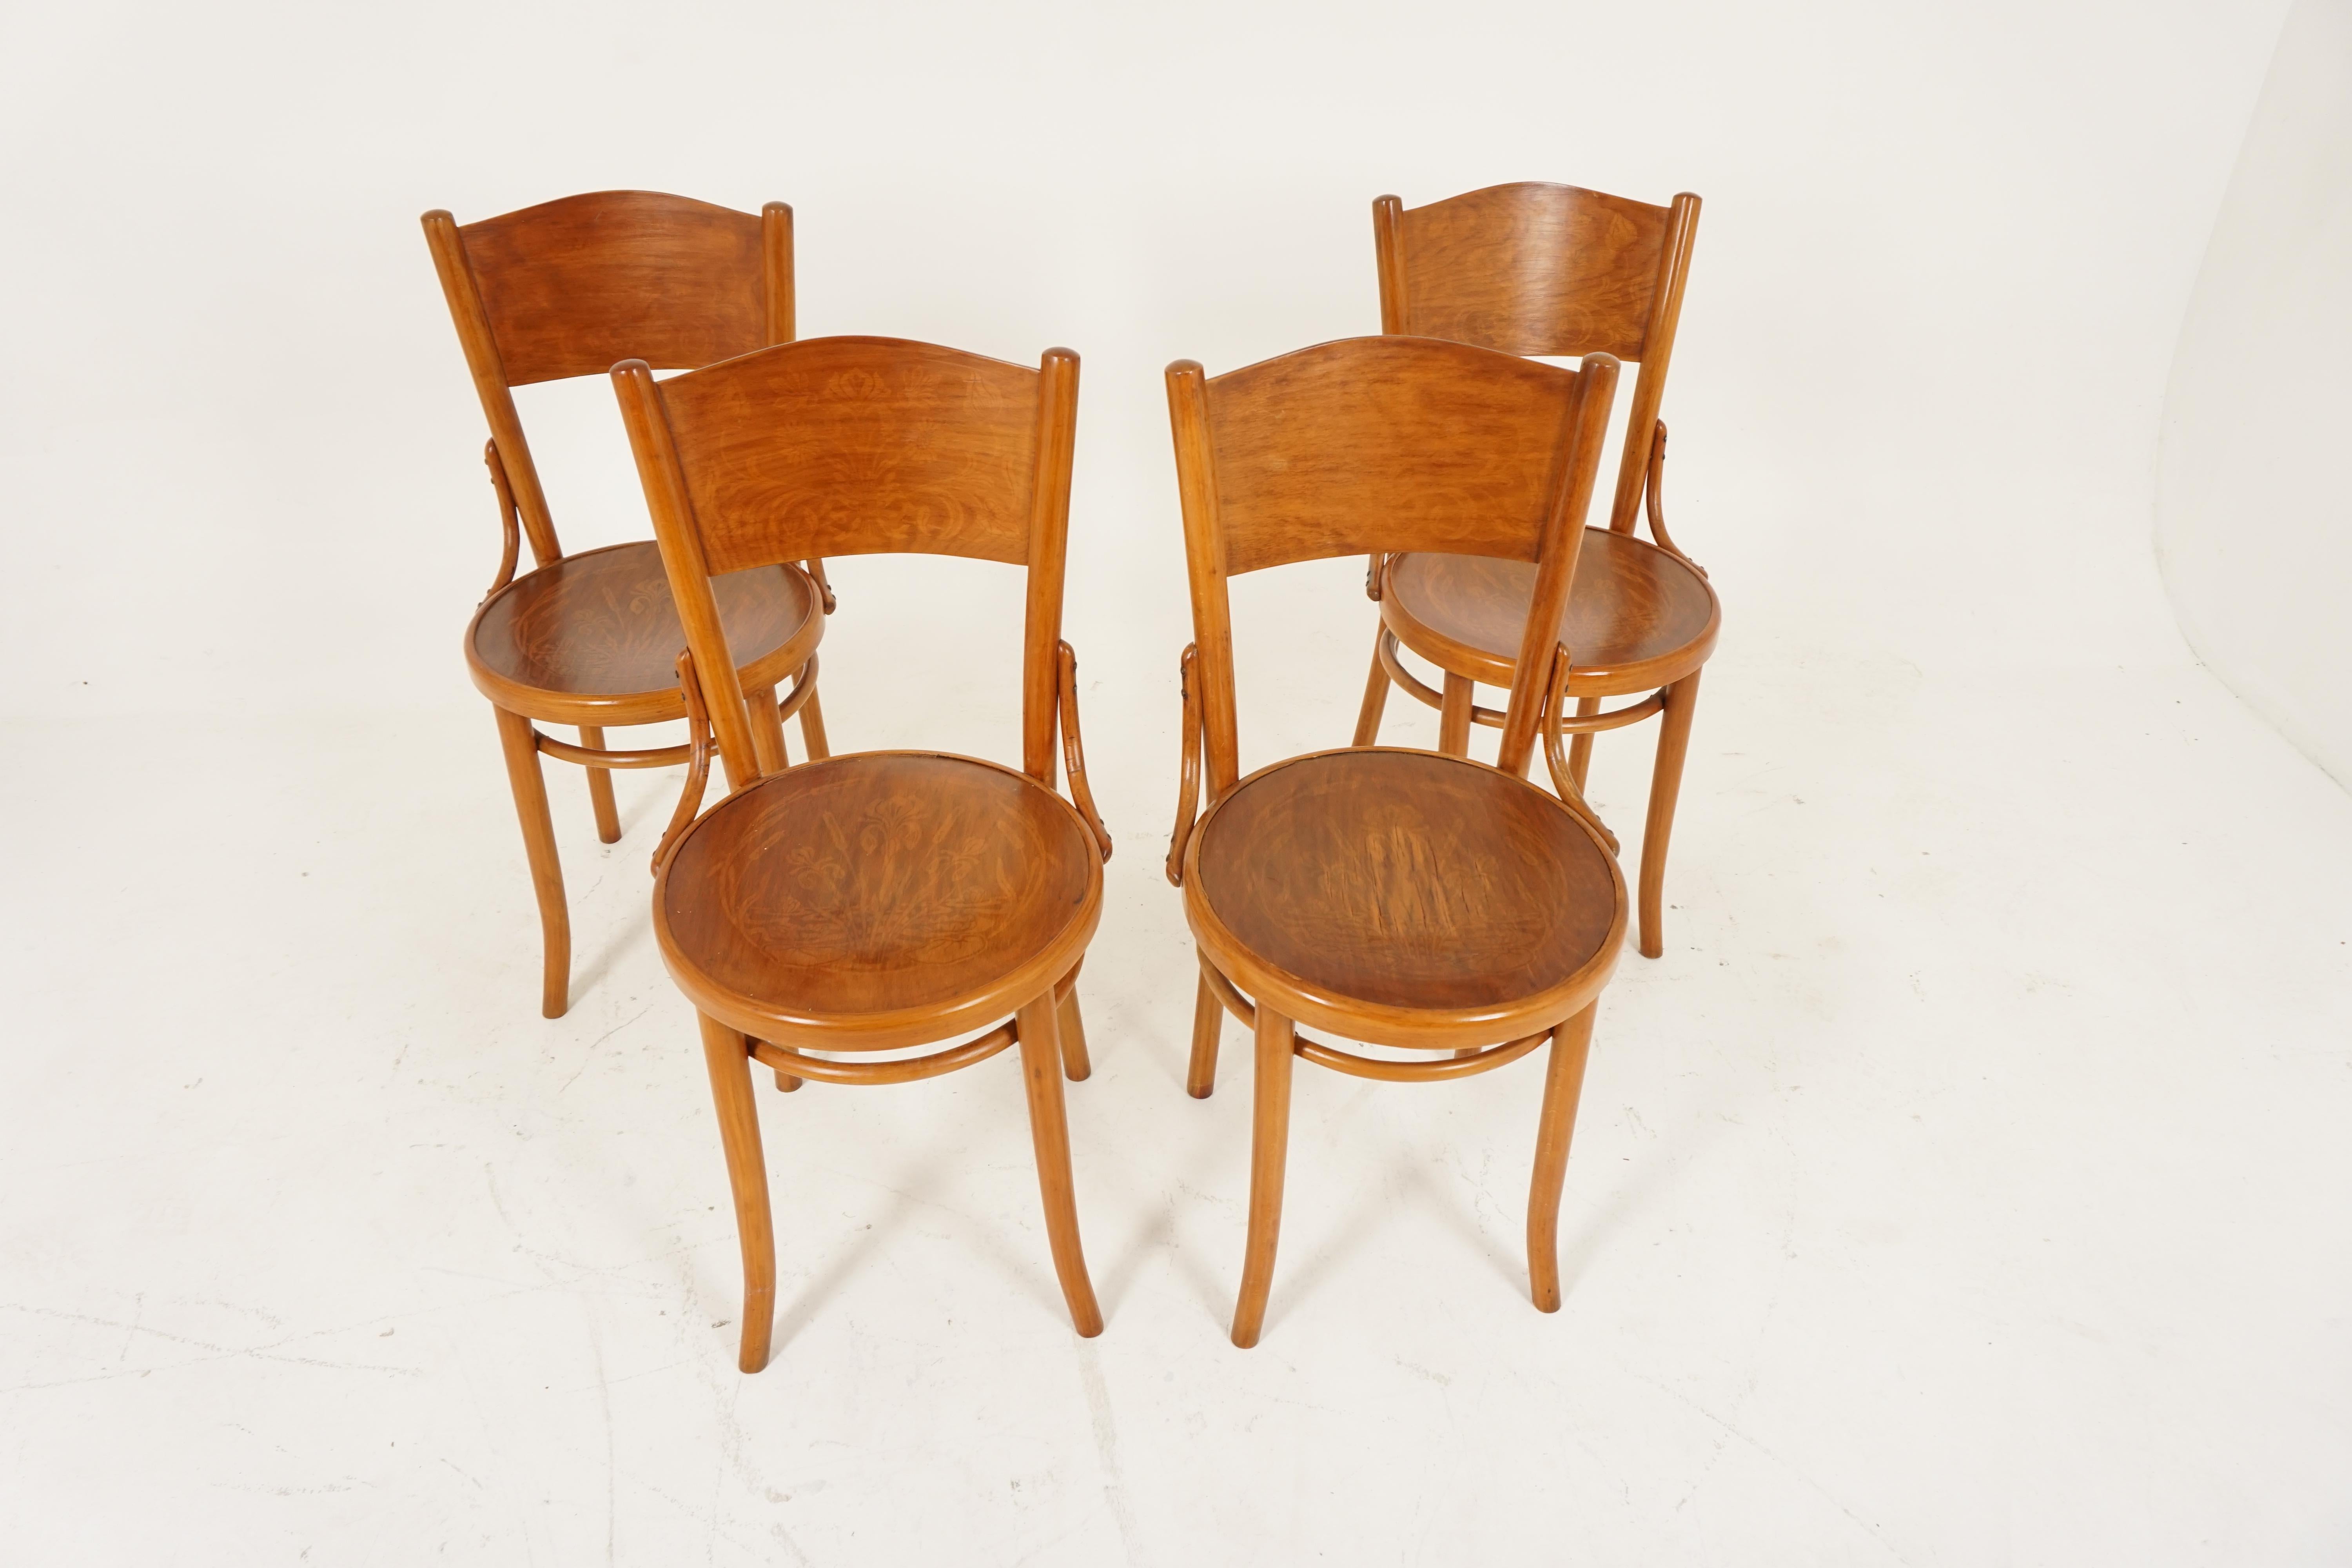 Vintage bentwood chairs, set of 4, 